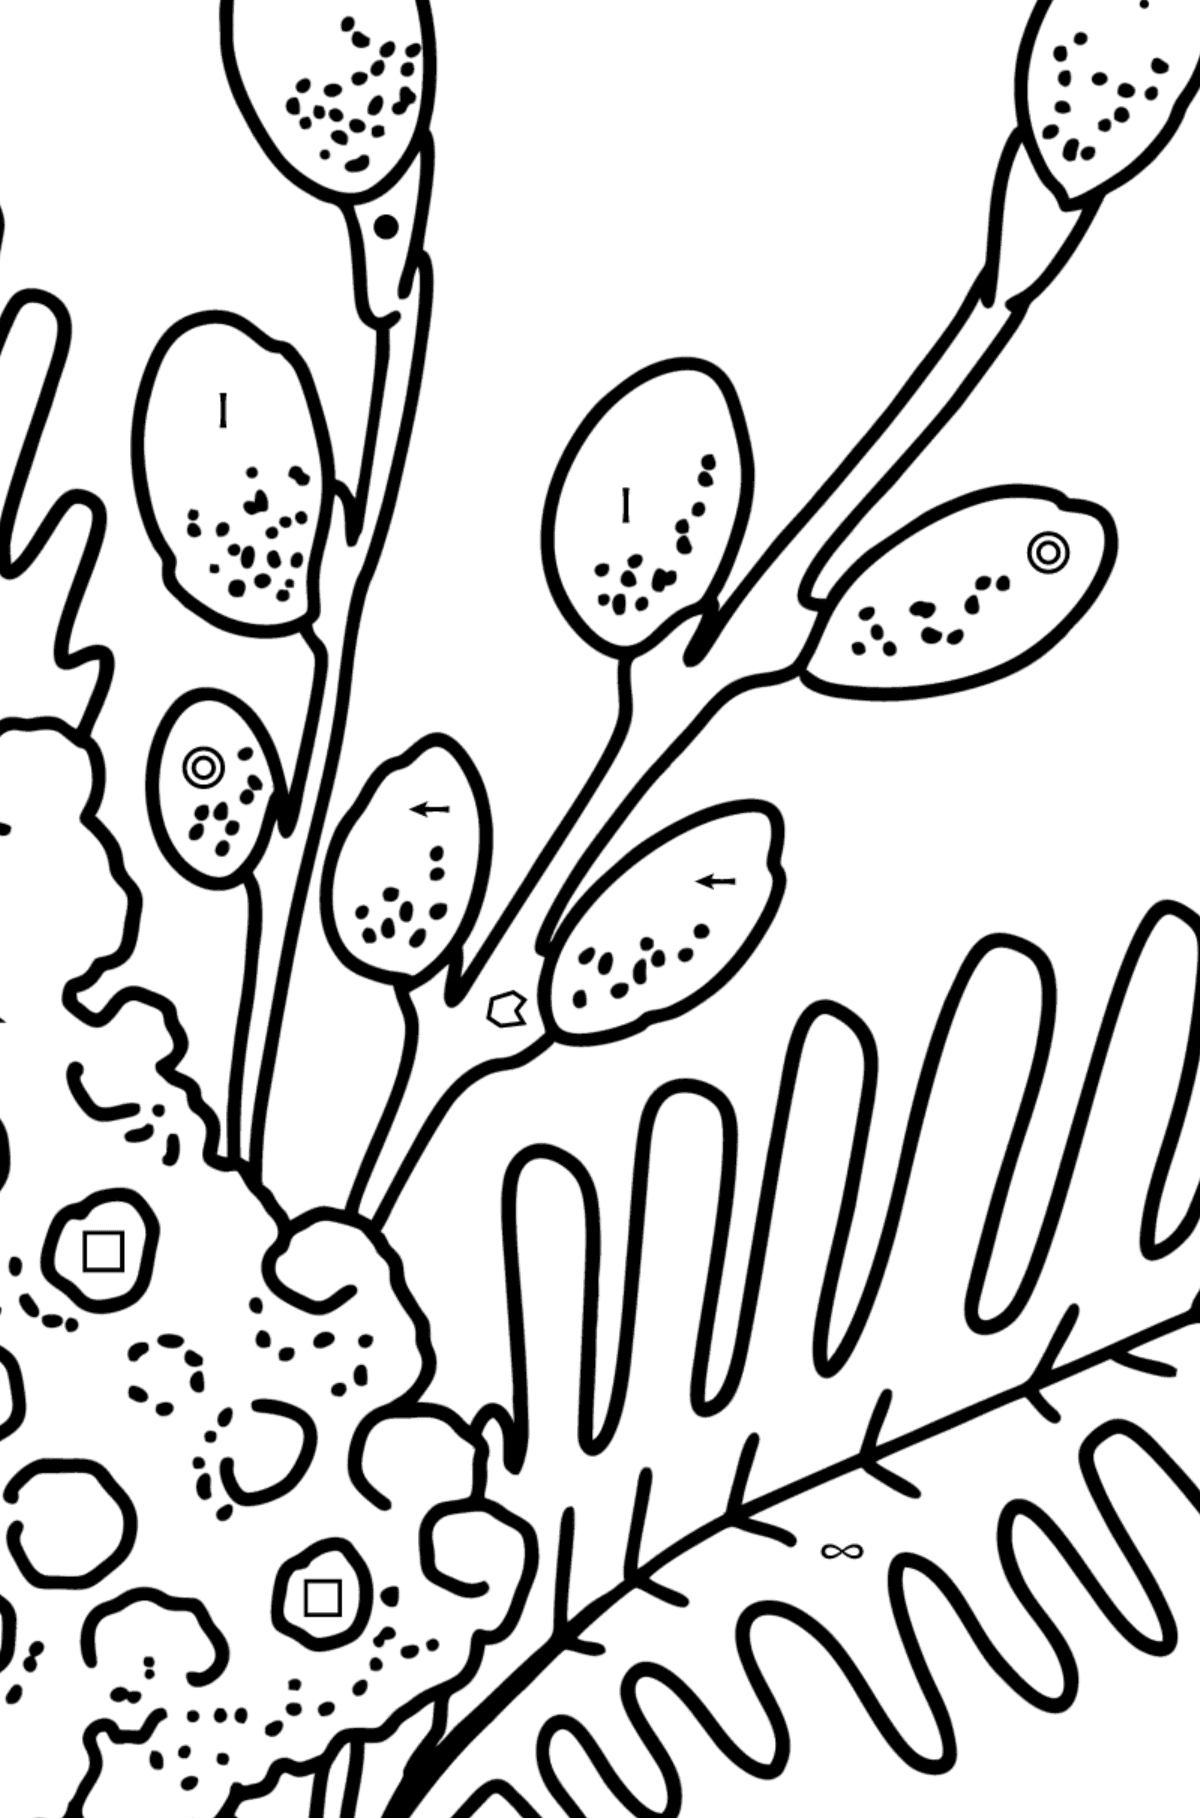 Coloring page - Mimosa and Pussy Willow - Coloring by Symbols and Geometric Shapes for Kids